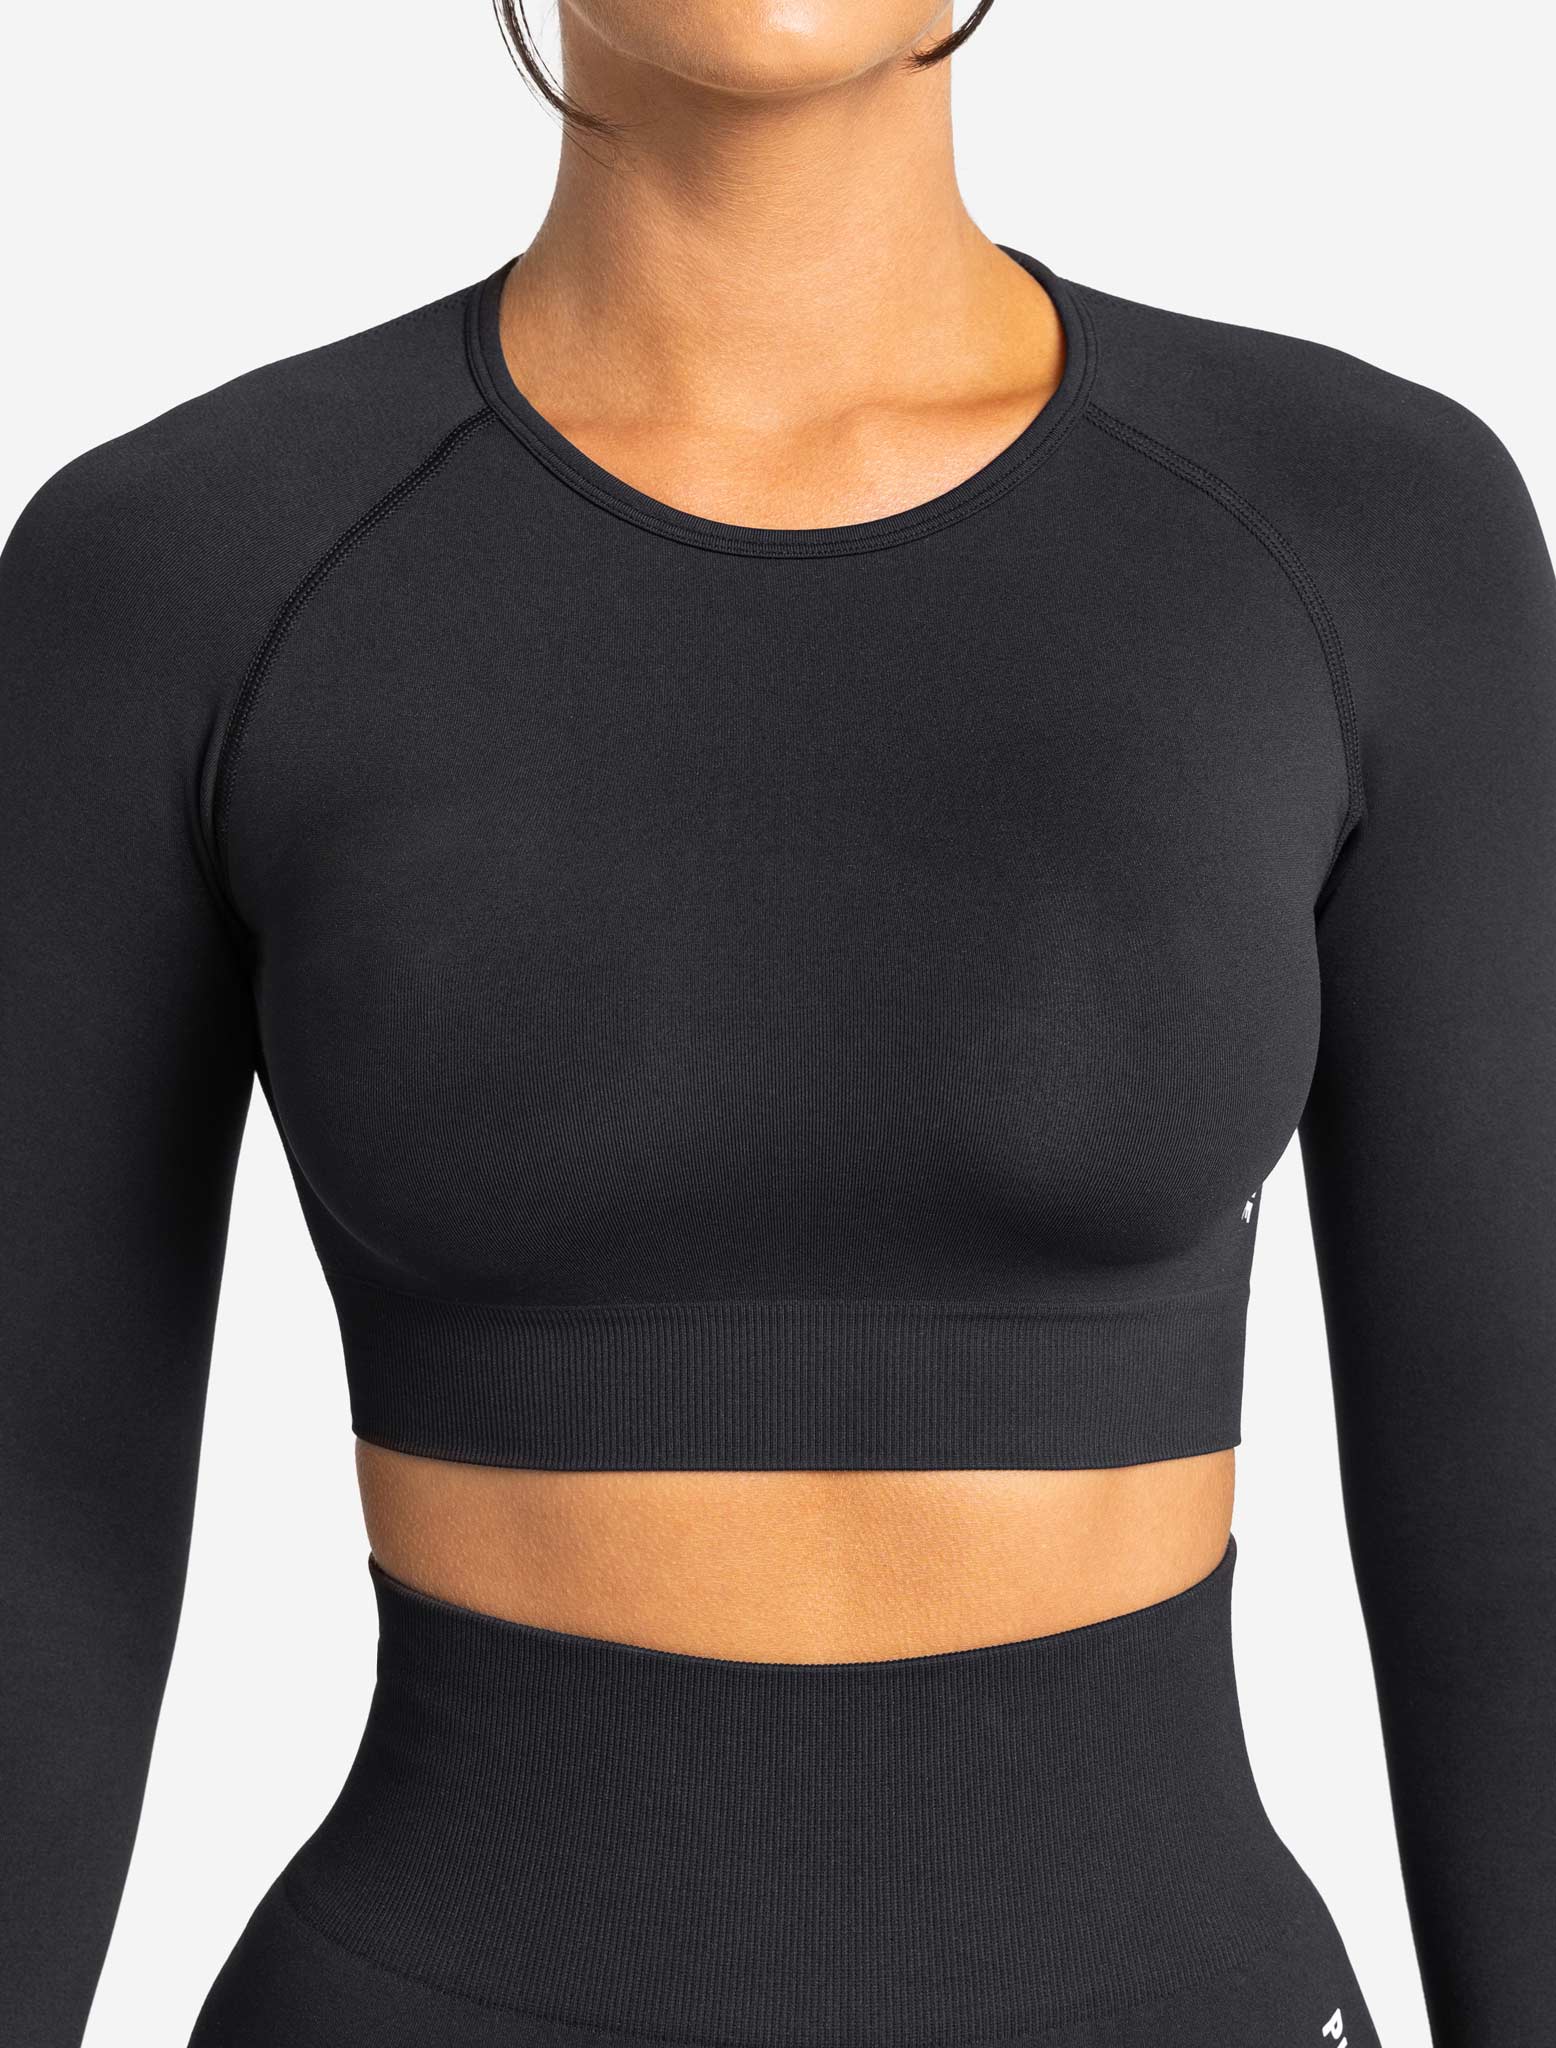 Pursue Fitness Black Long Sleeve Cropped Gym Top L 12 ❤️